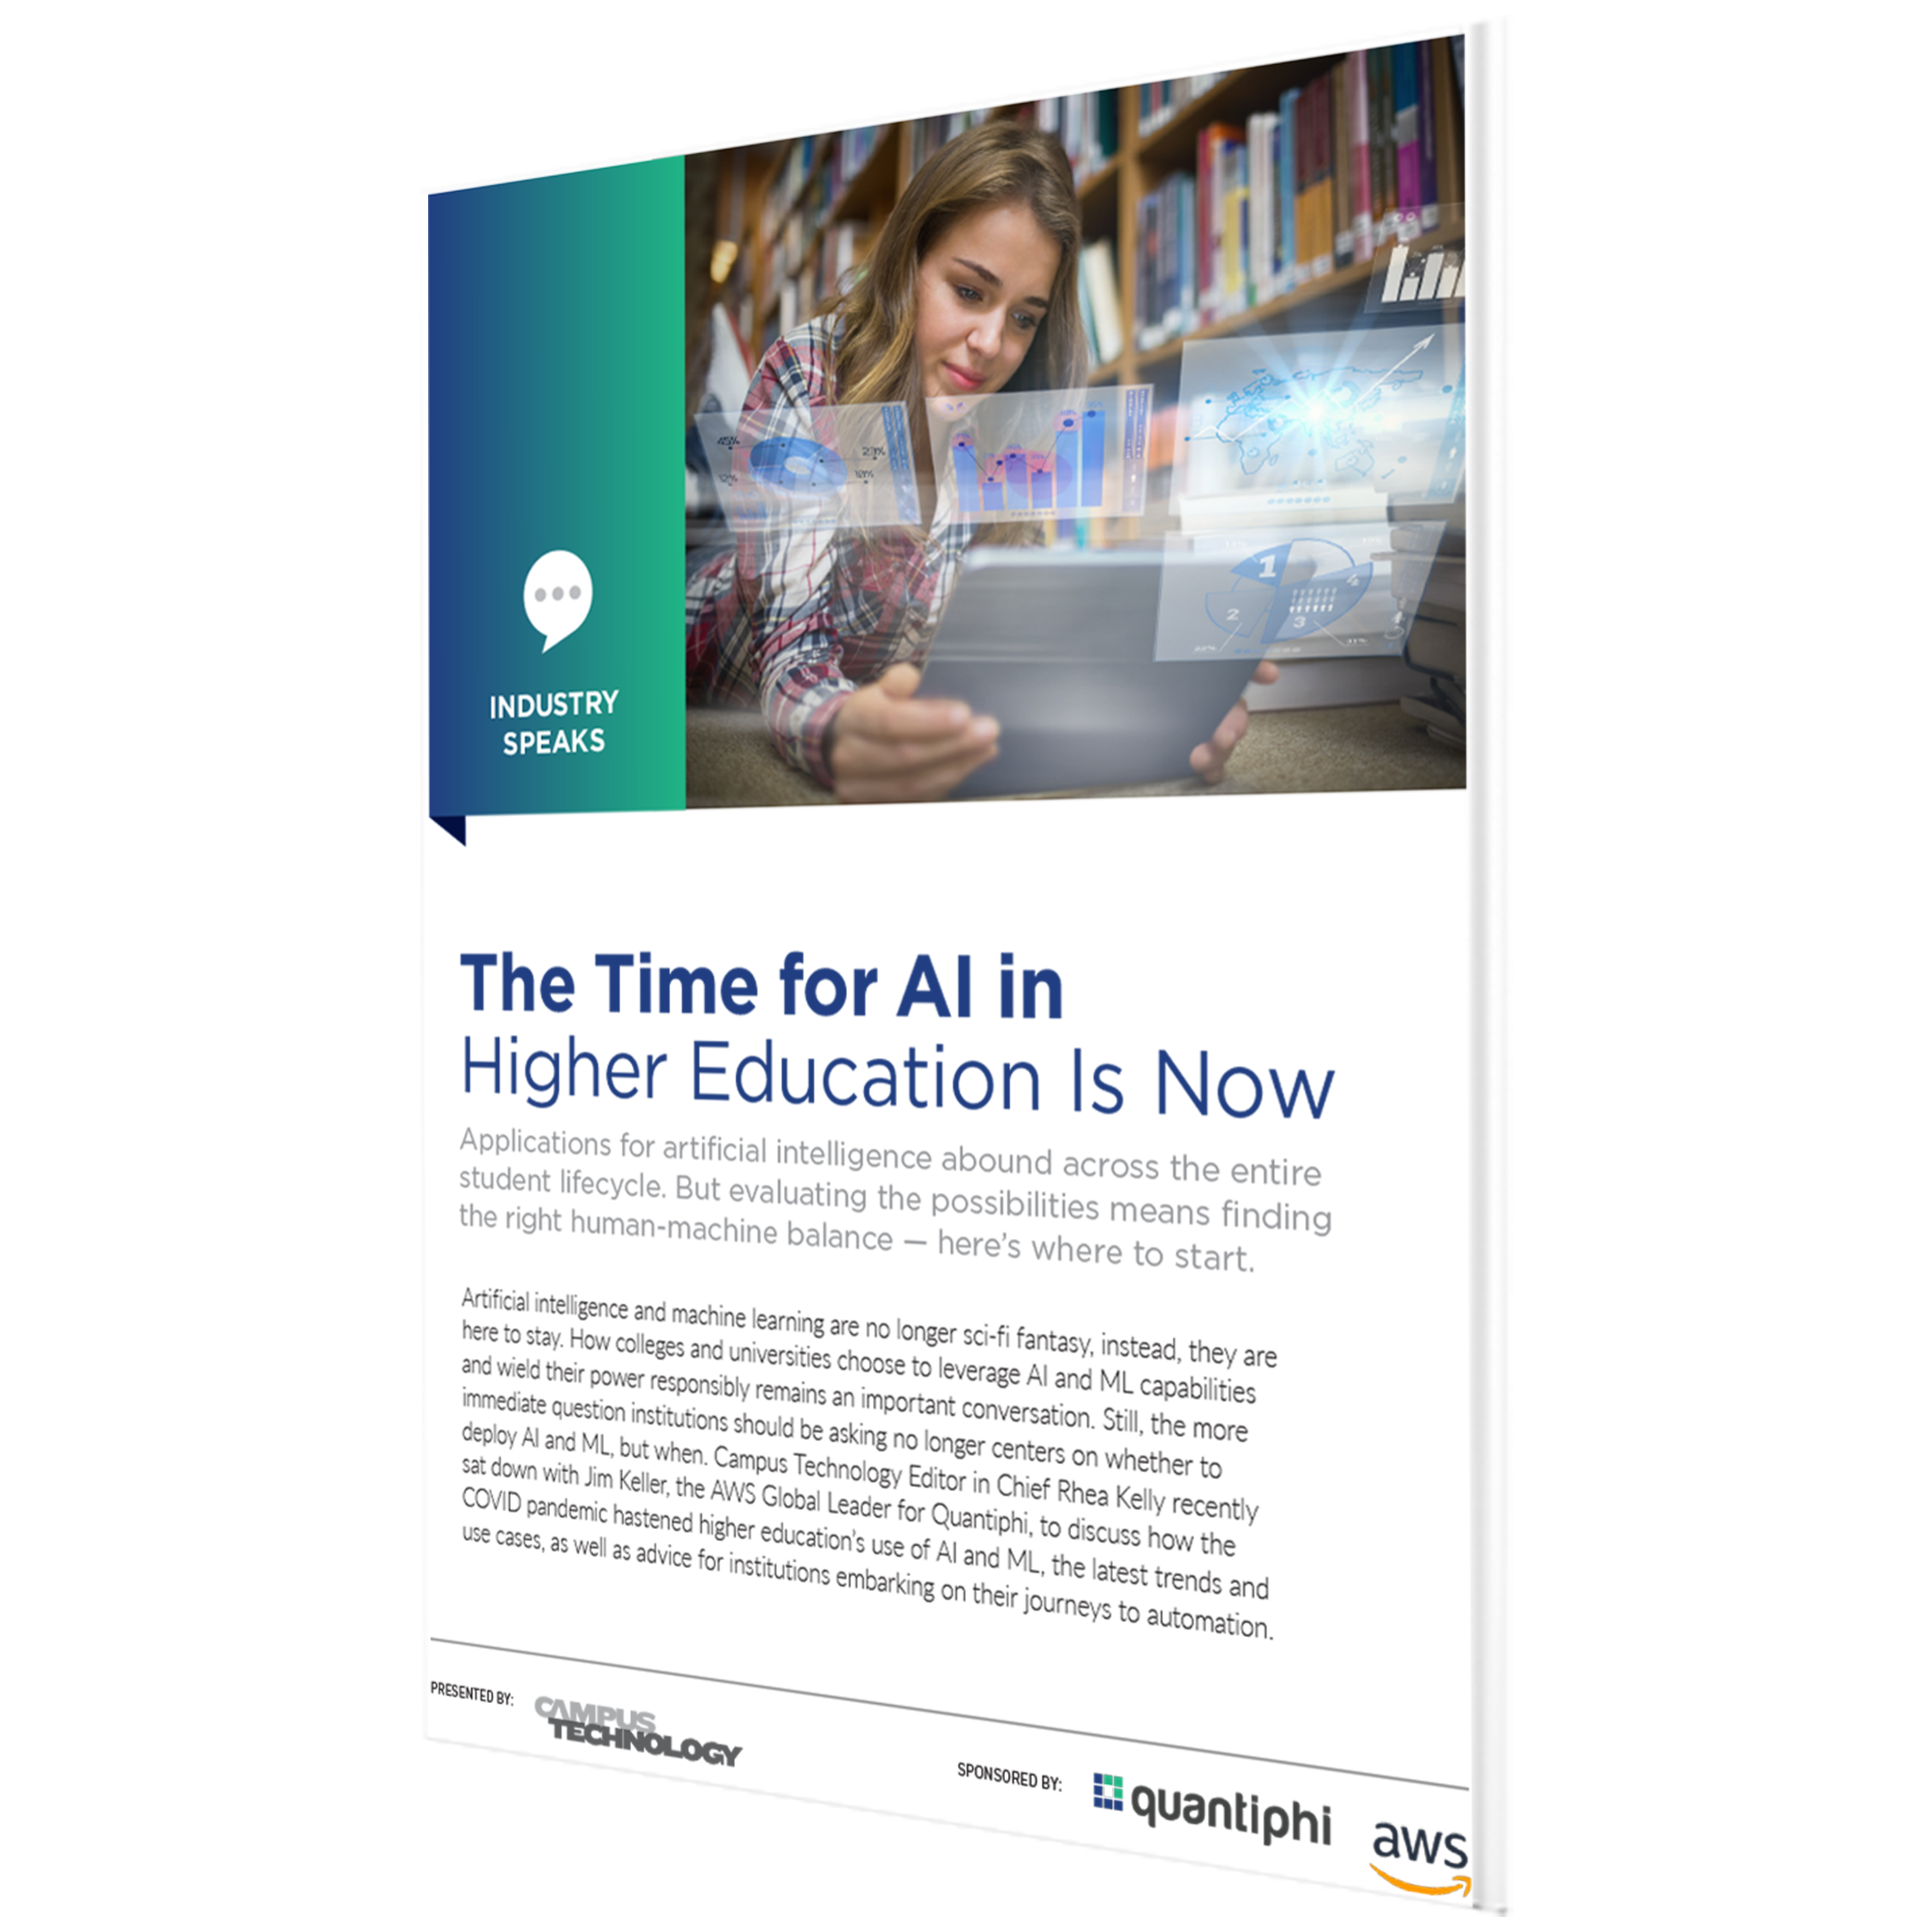 The Time for AI in Higher Education Is Now